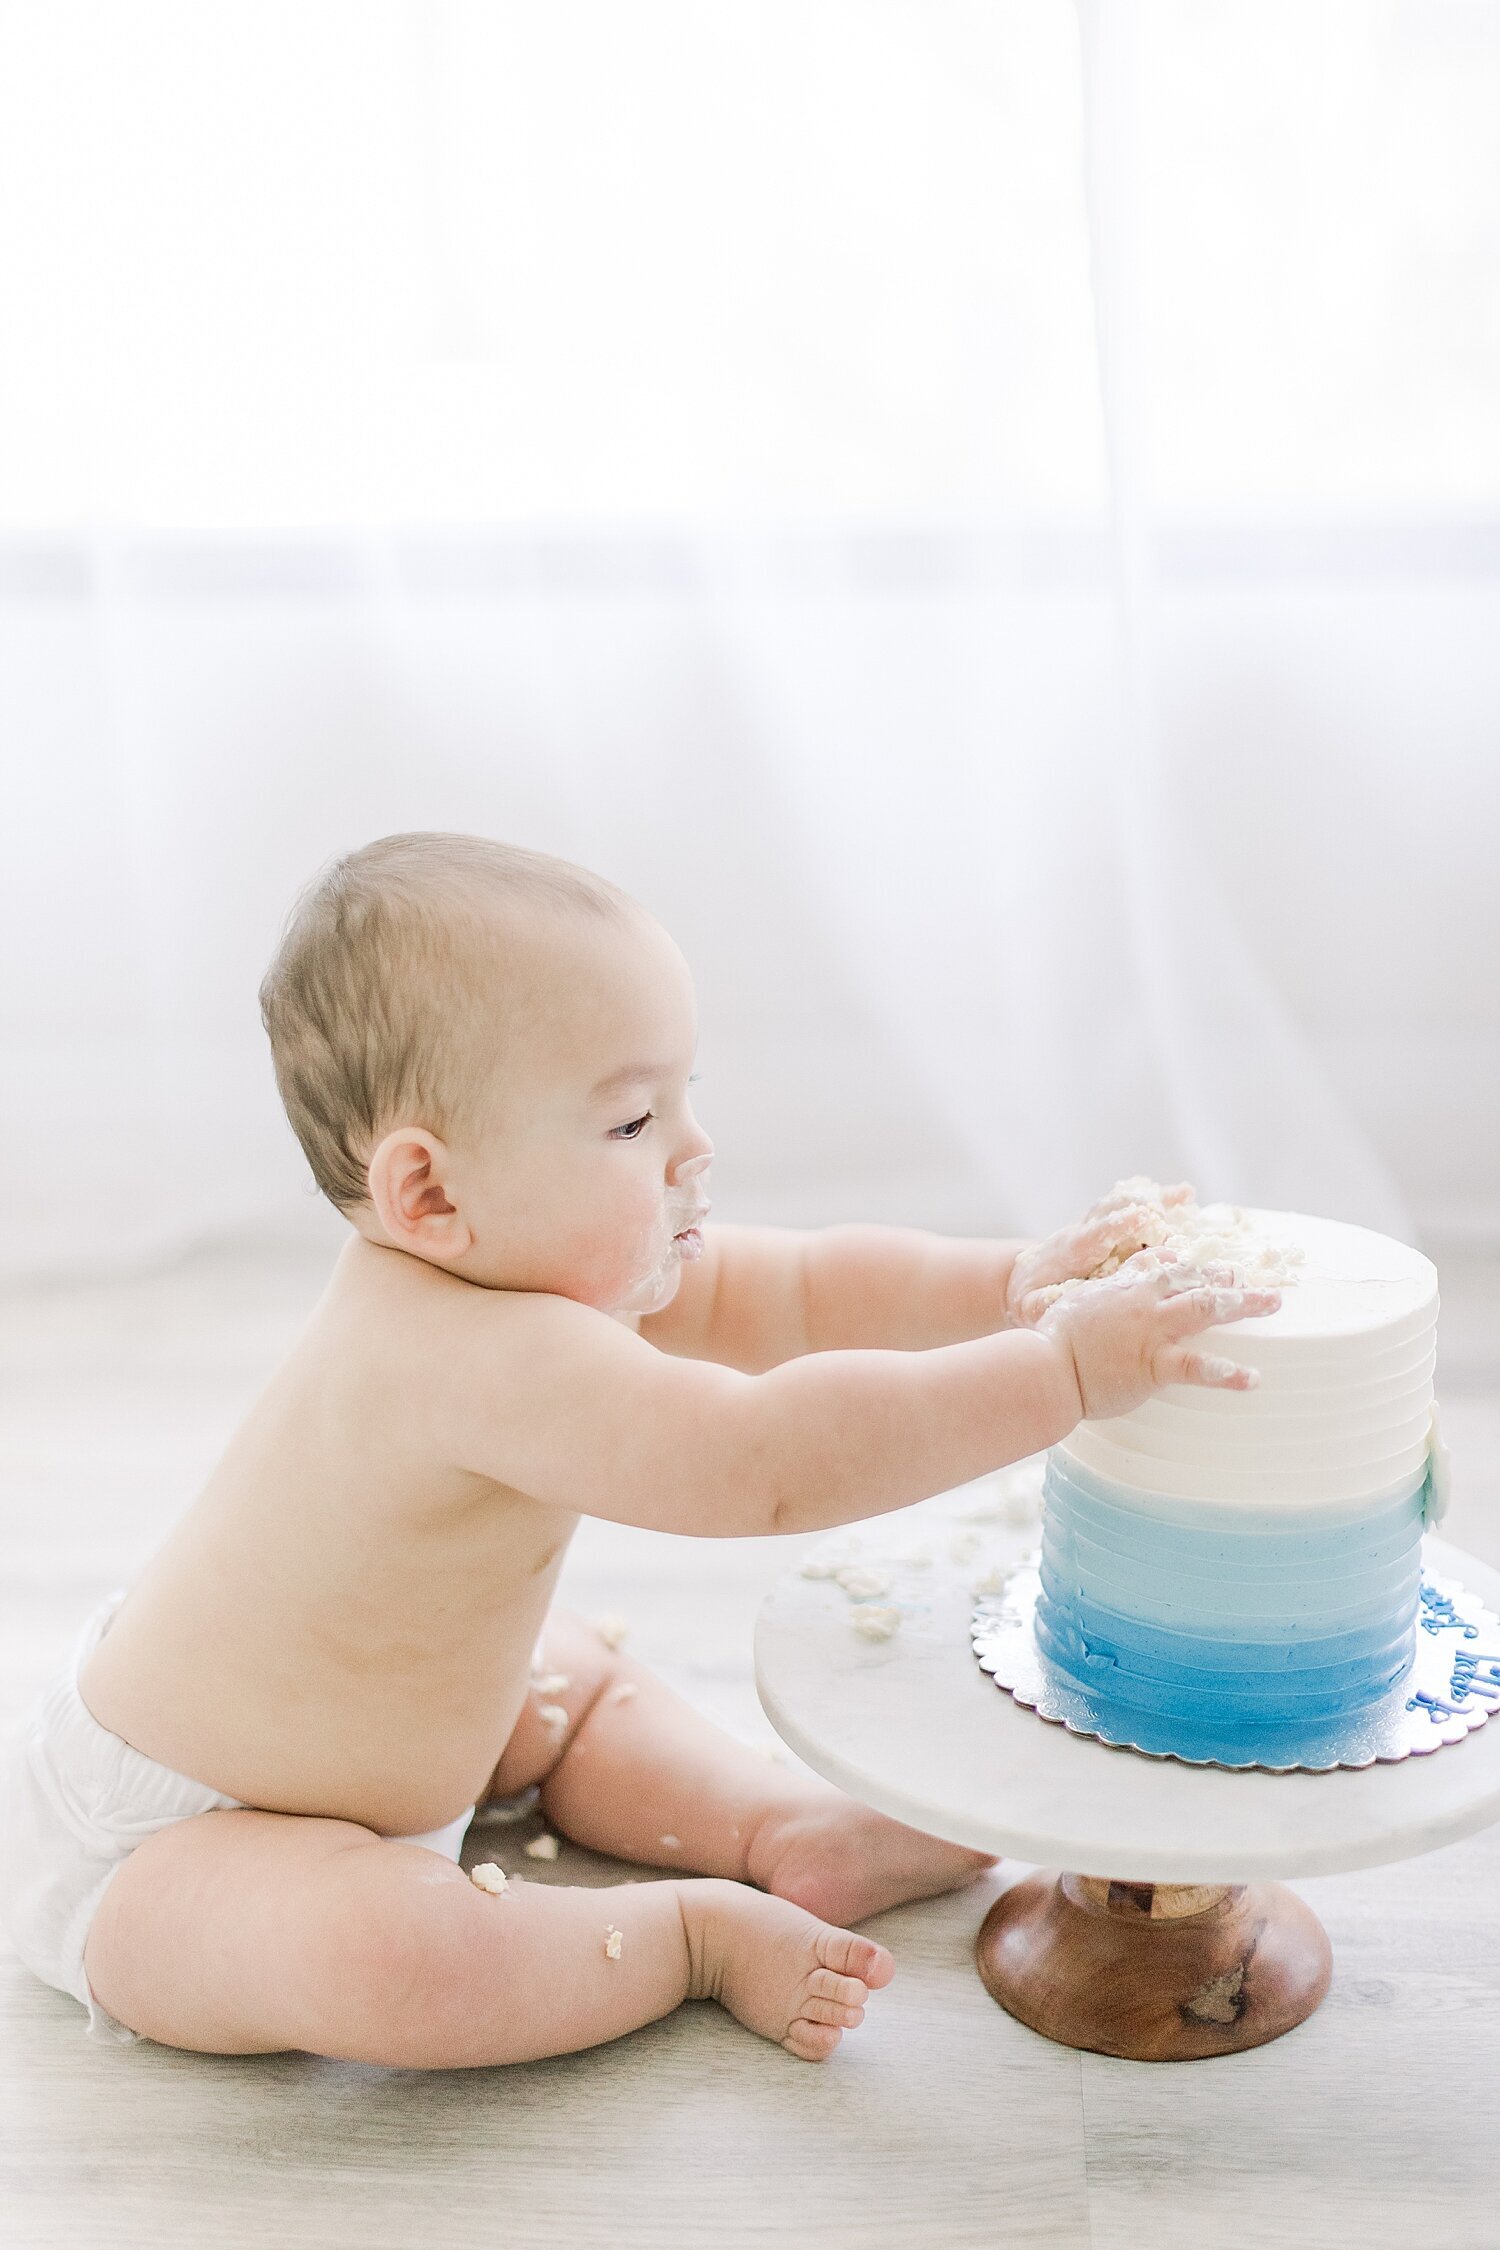 One year old playing in cake first cake smash session. Photo by Ambre Williams Photography.